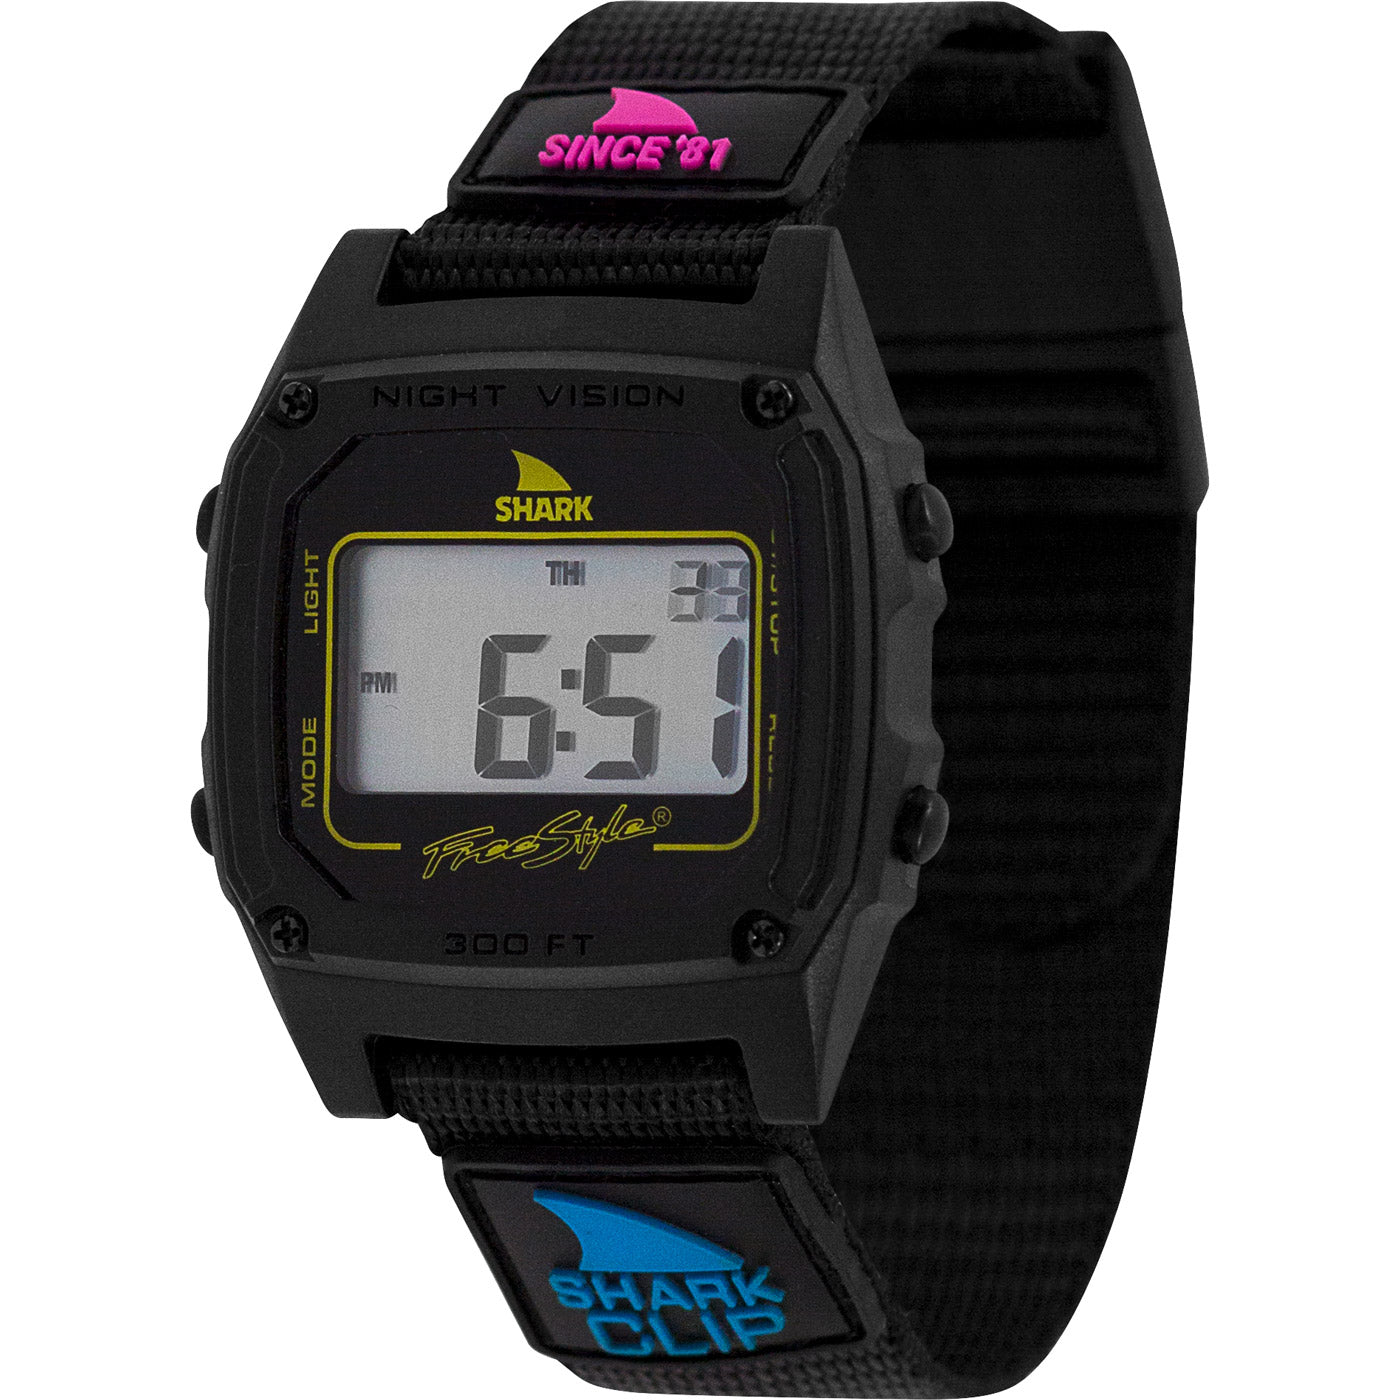 Freestyle Watches Shark Classic Clip Since 81' Primary Black Unisex